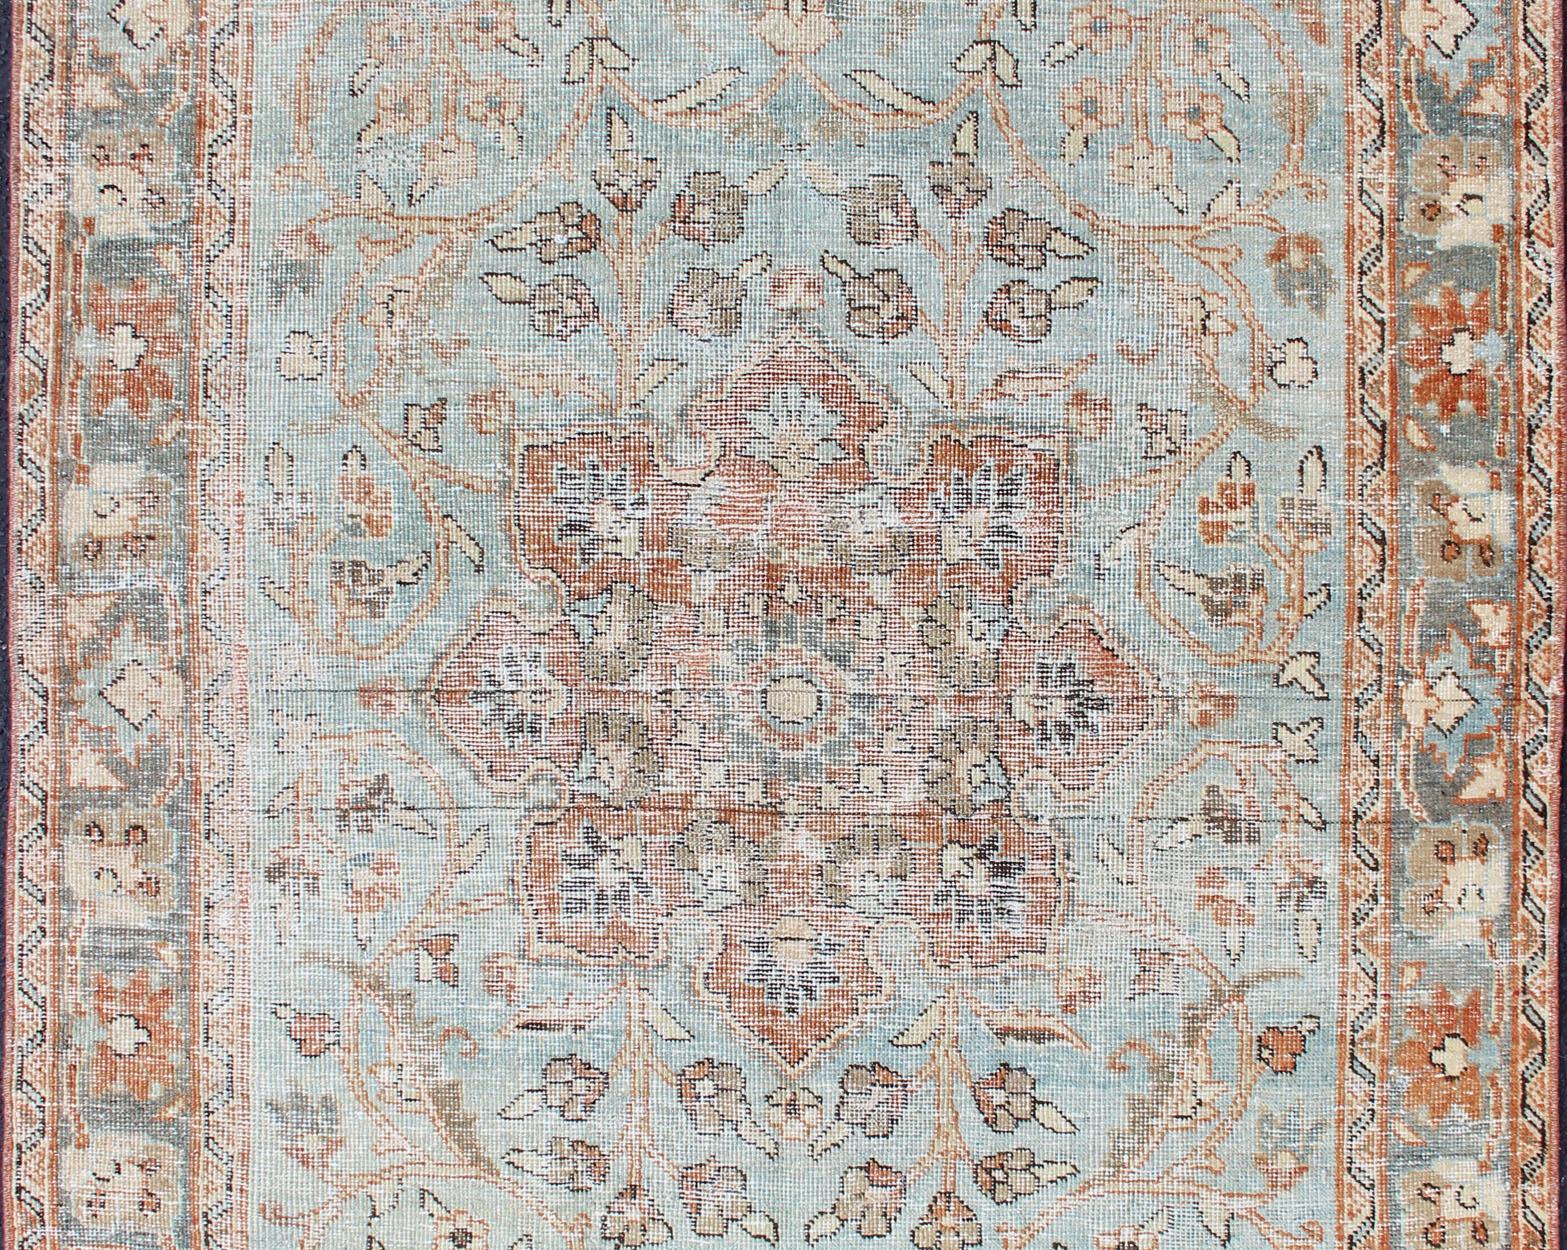 Light blue antique Persian Mahal rug with ornate medallion floral design, rug SUS-2009-235, country of origin / type: Iran / Sultanabad, circa 1920.

This beautiful antique Persian Sultanabad Mahal rug displays a gorgeous, medallion sub-geometric